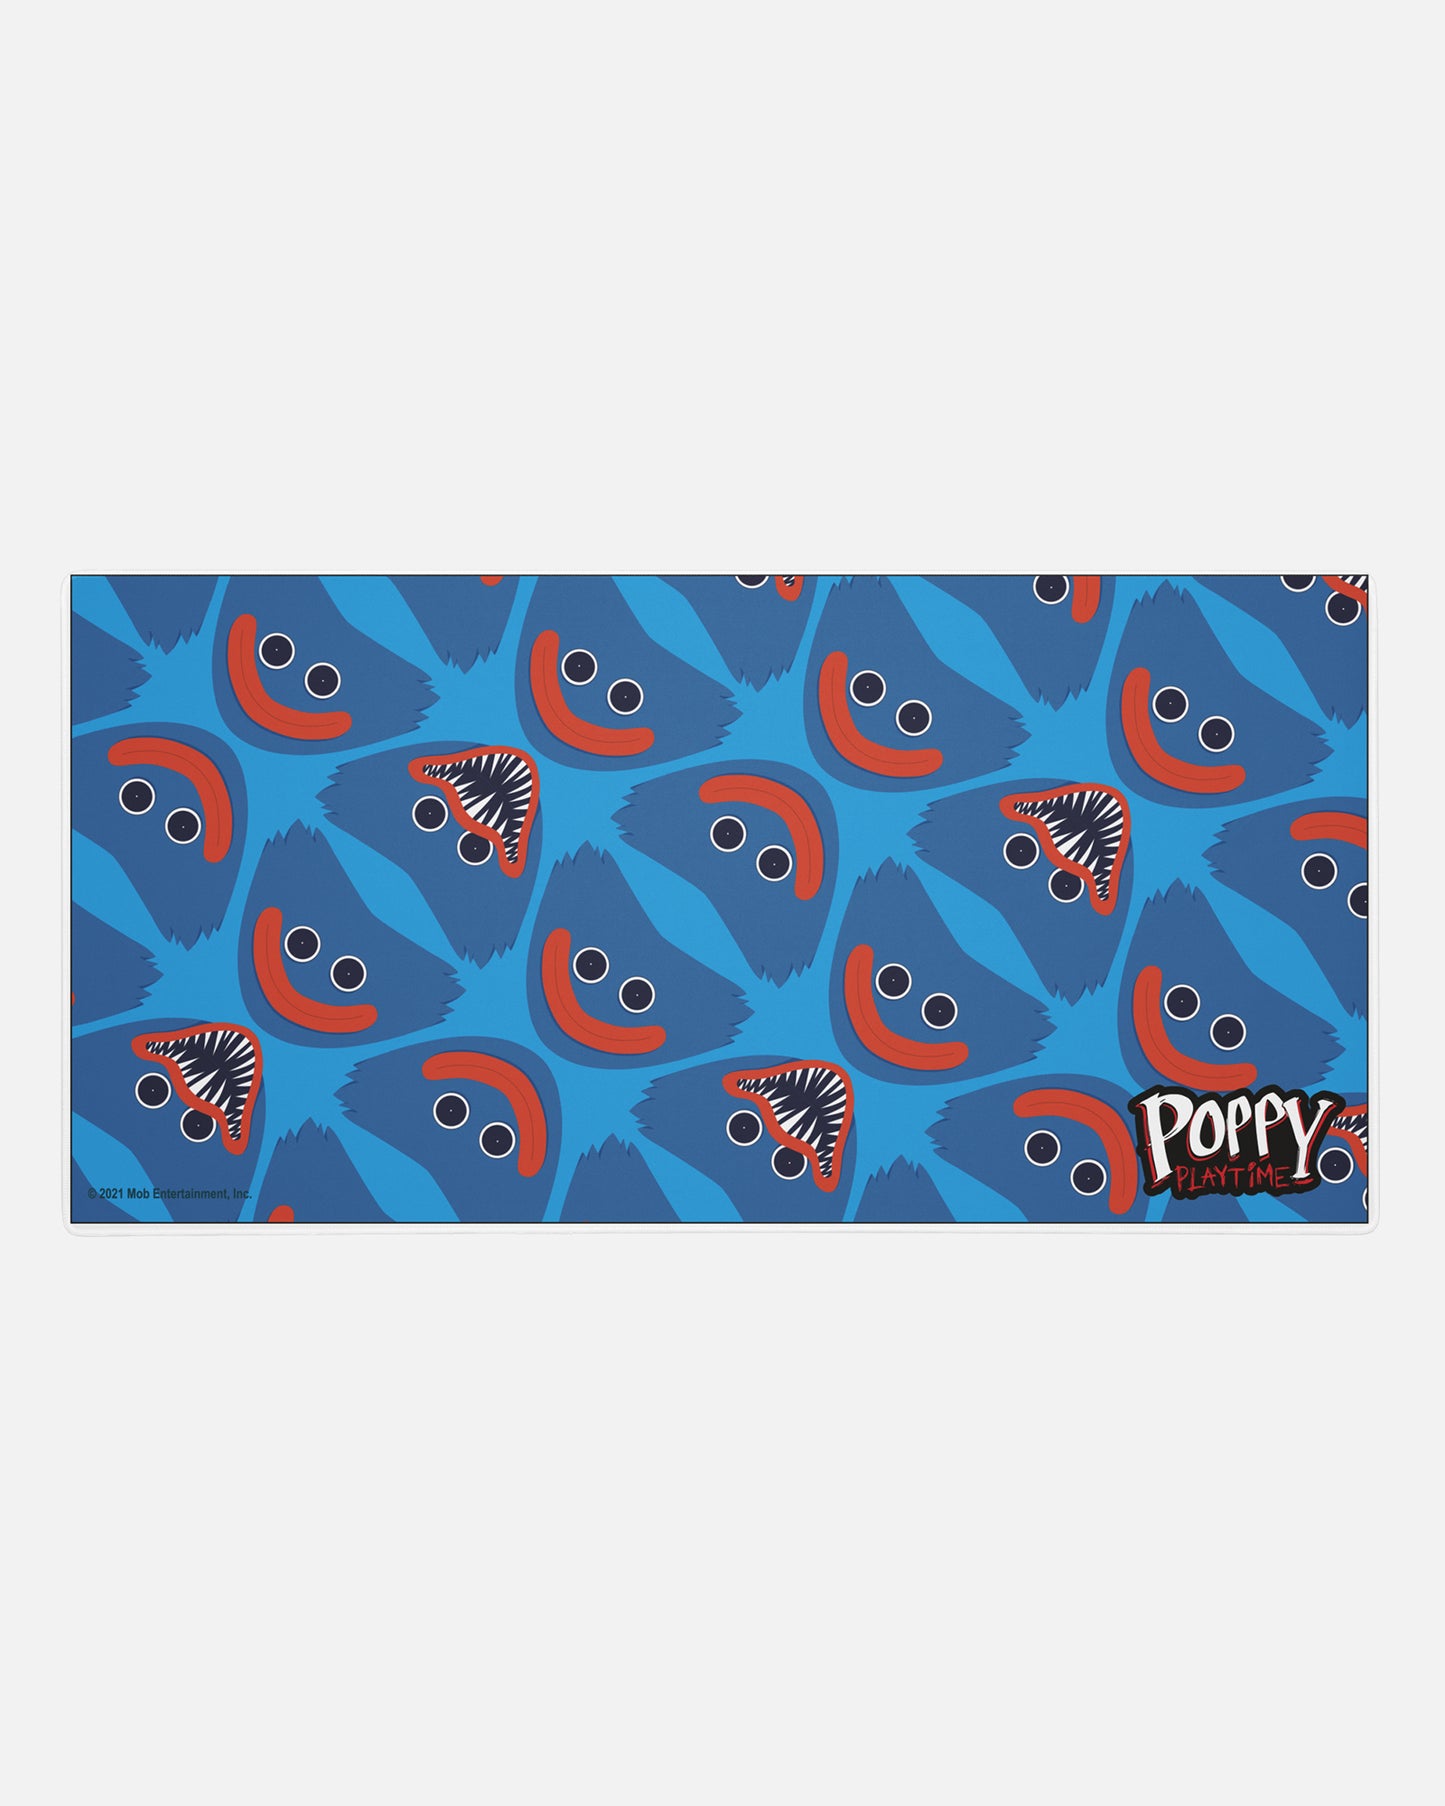 huggy wuggy gamer mousepad. image: repeating pattern of evil and good huggy faces. text: poppy playtime